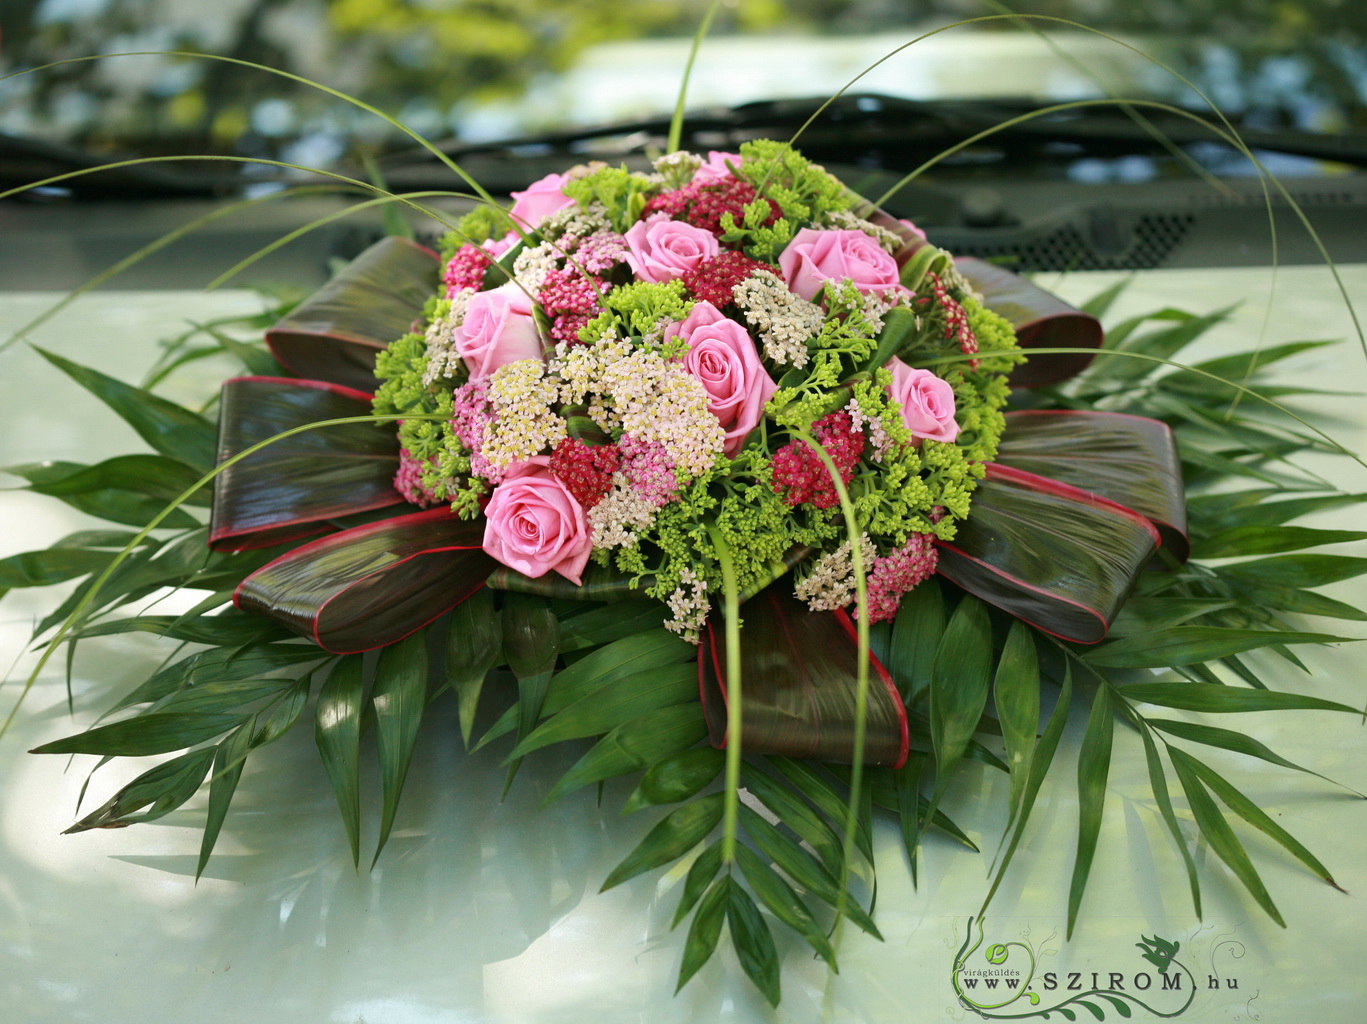 flower delivery Budapest - round car flower arrangement with milfoils, sedums and roses, only in summer (green, pink)